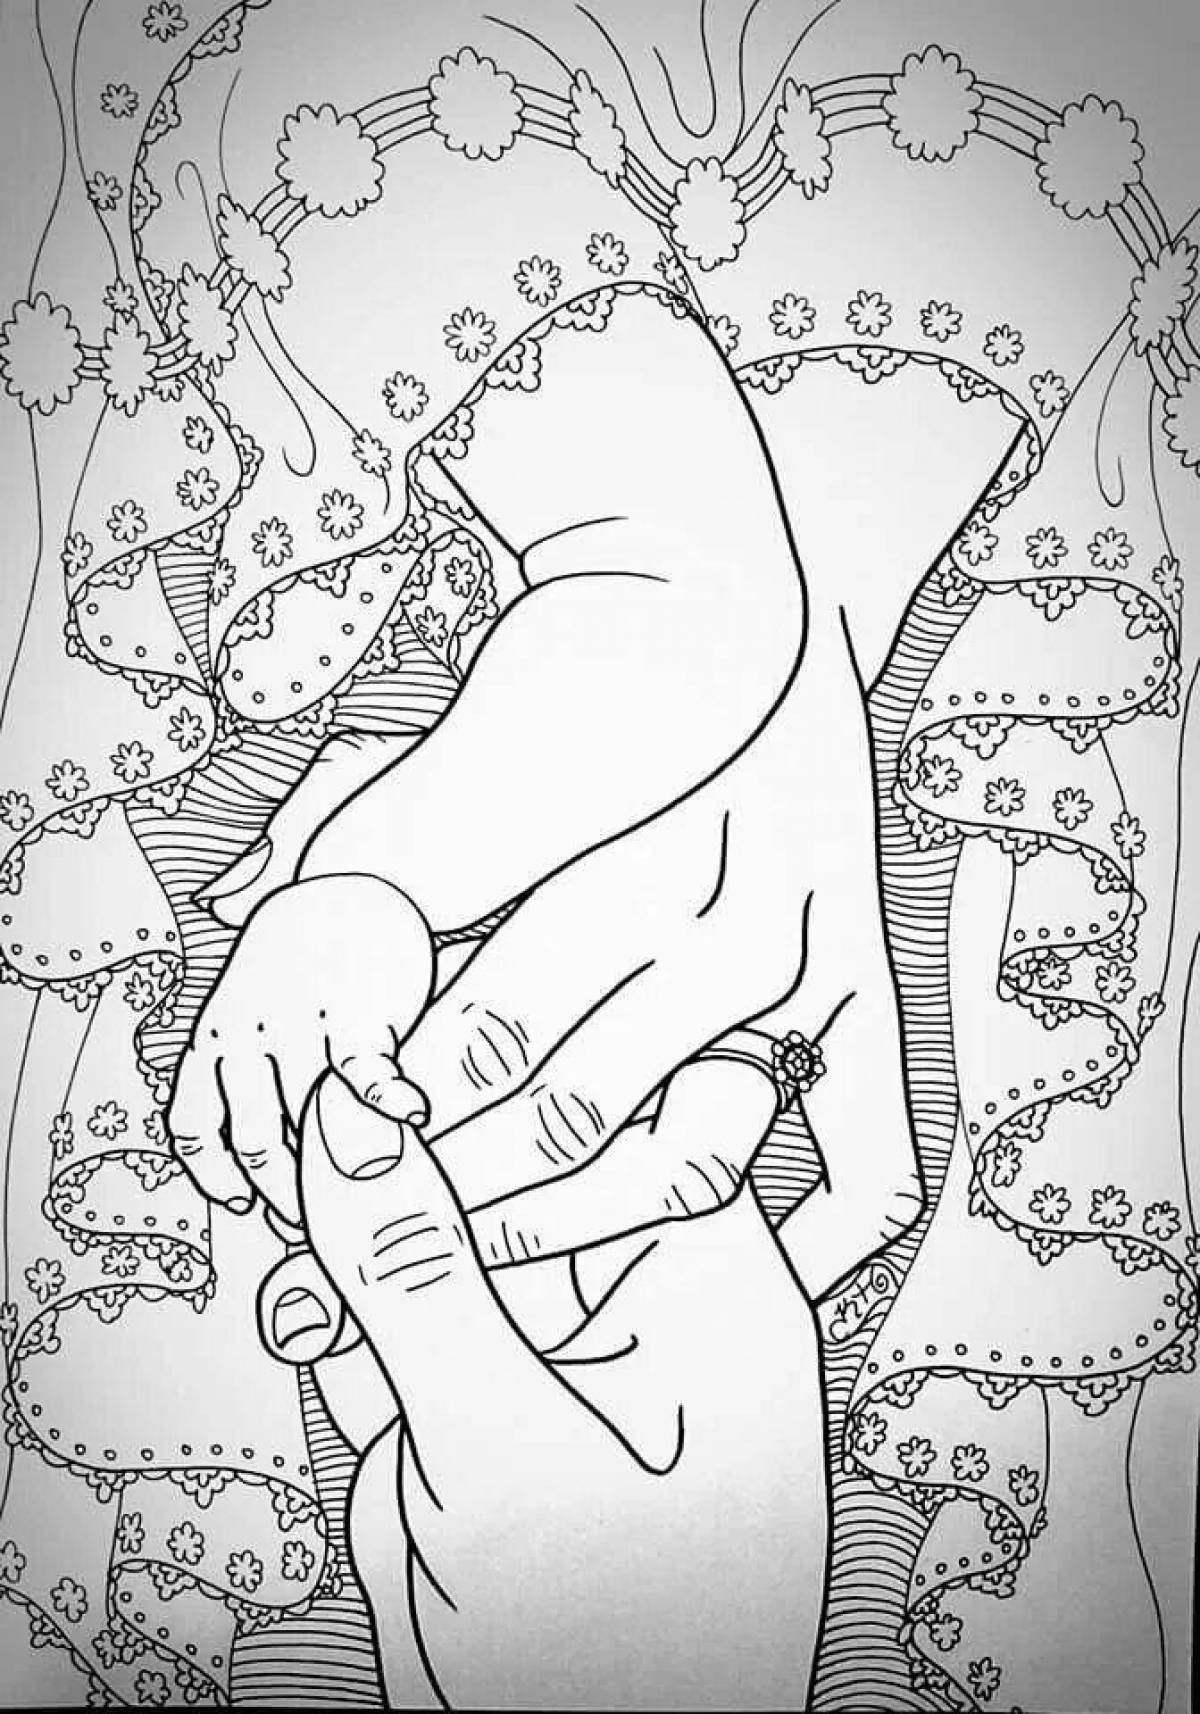 Exalted pregnancy coloring page